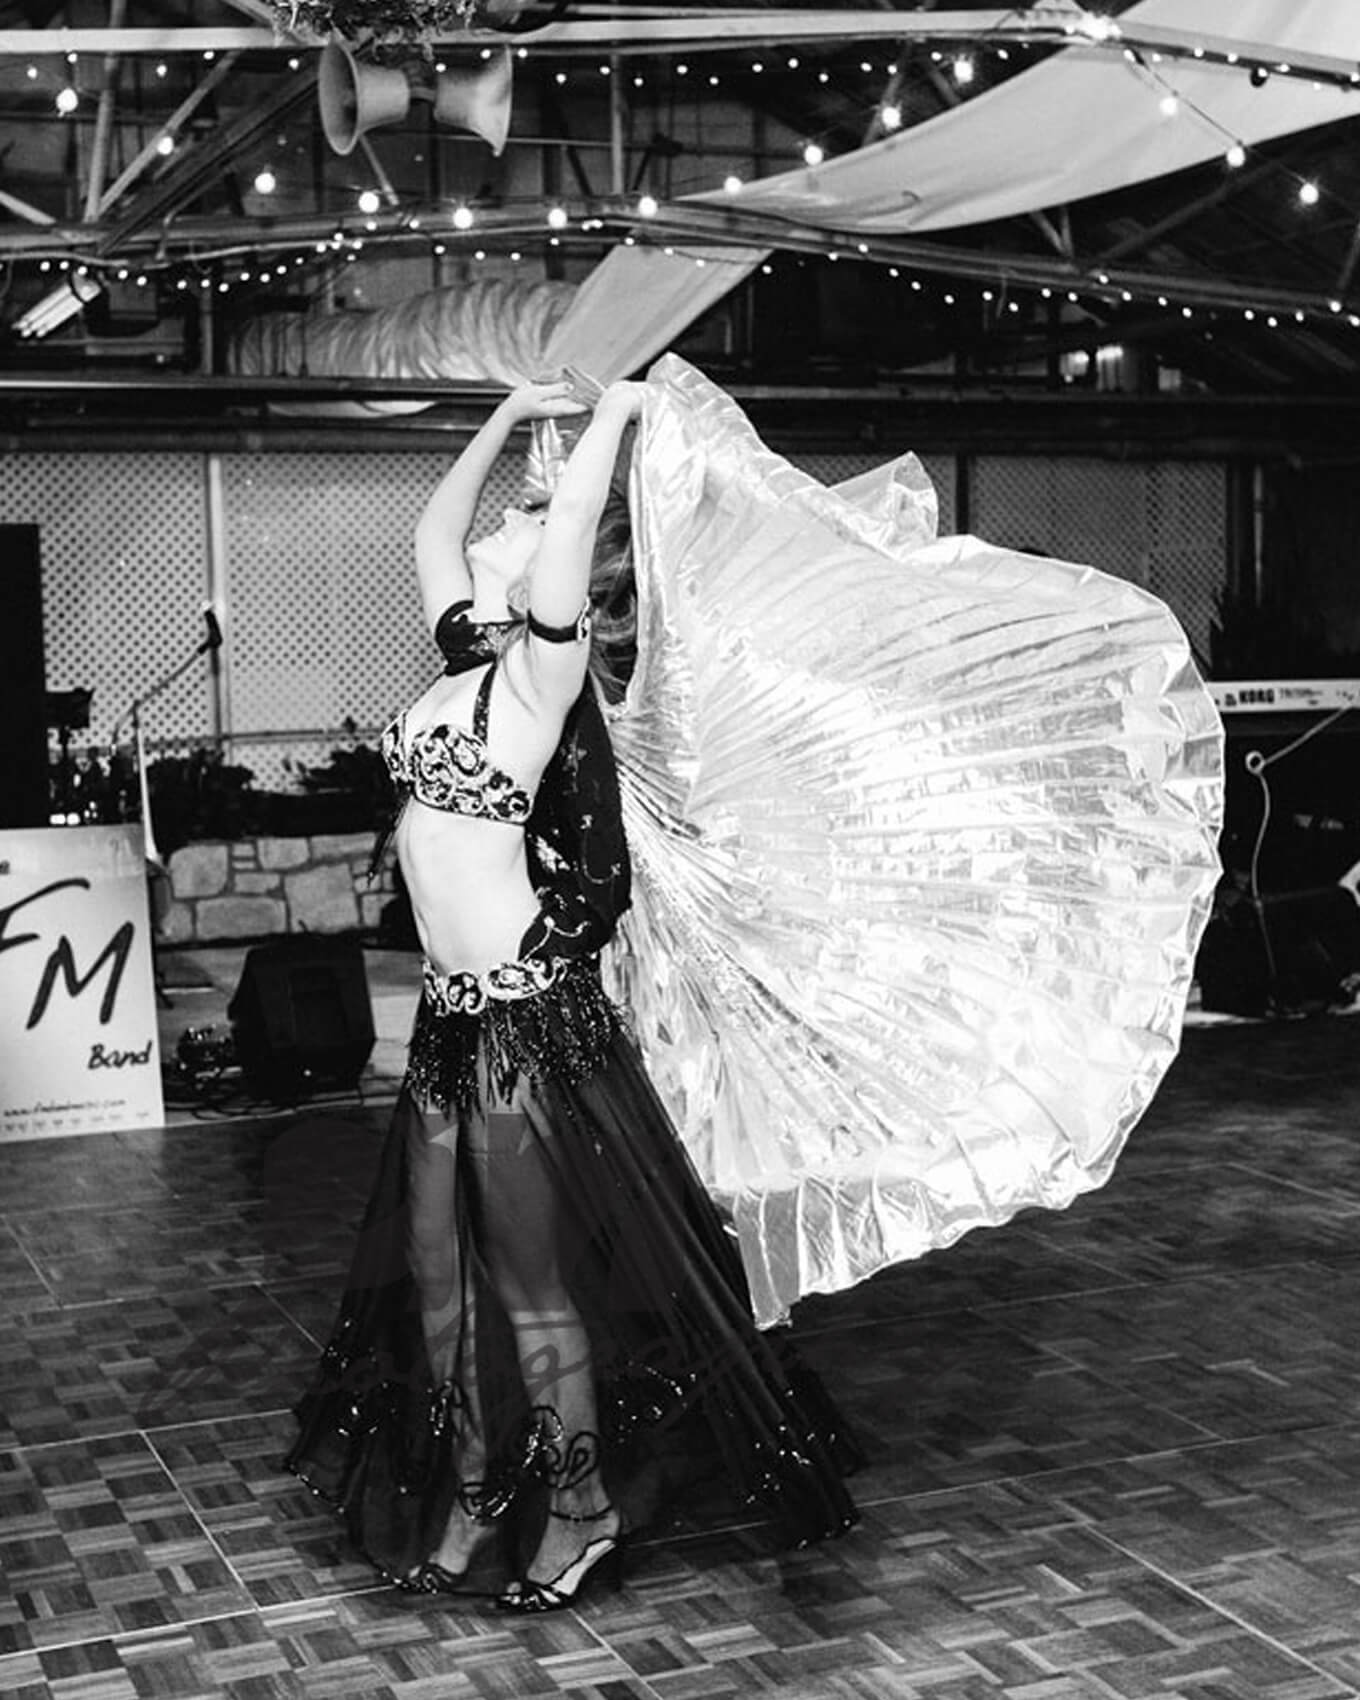 Donna performs using her belly dancing outfit with isis wings